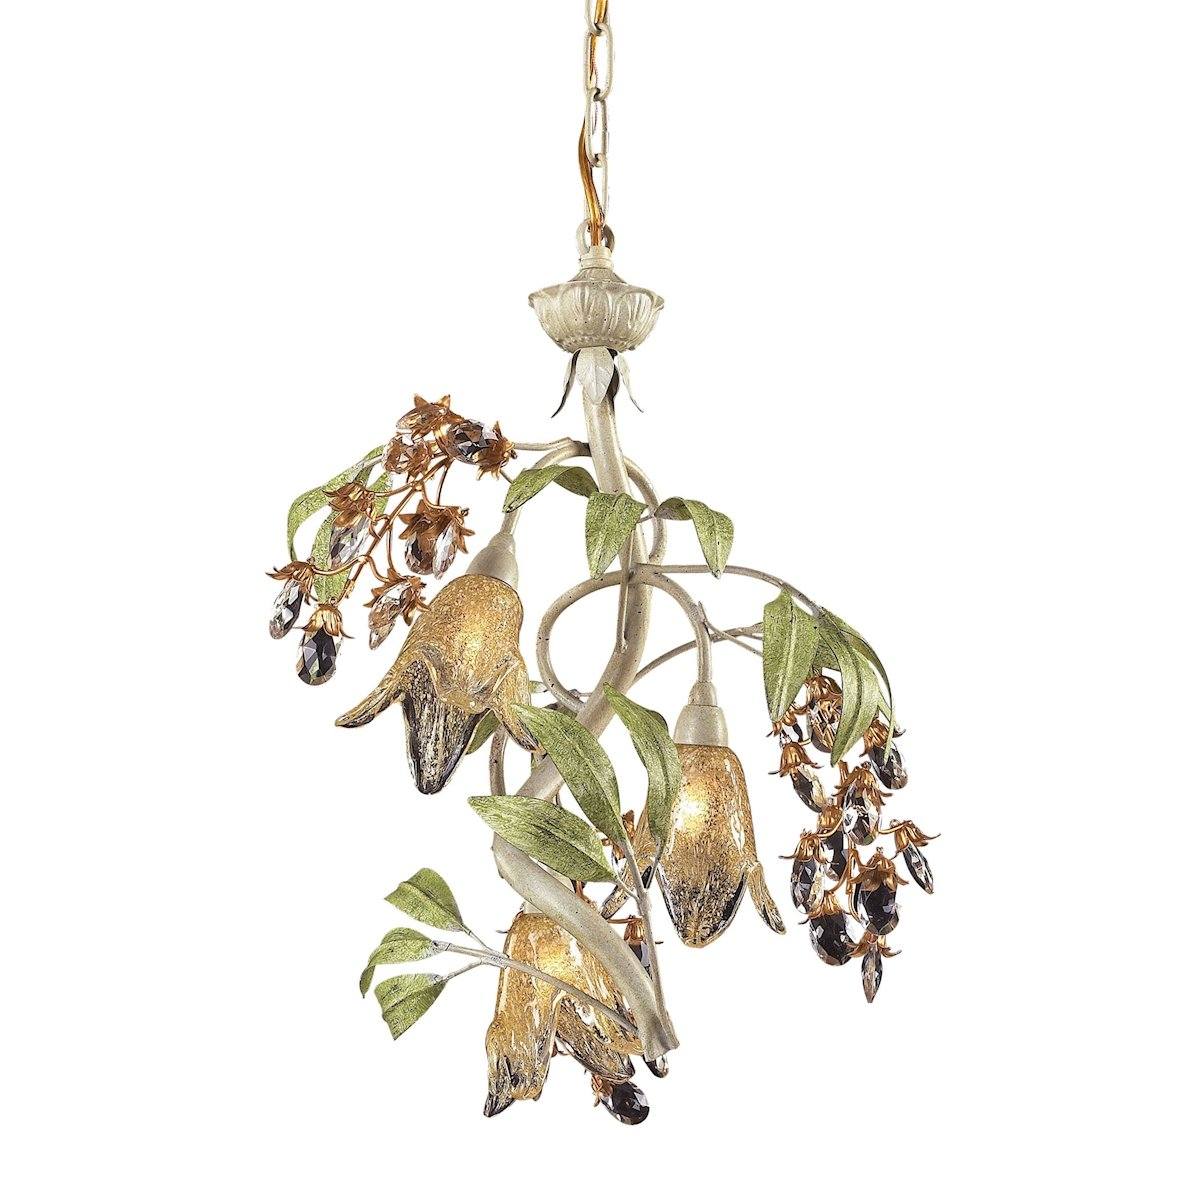 D Huarco Collection 16"w Pendant in Seashell Finish Ceiling Elk Lighting Default Value 